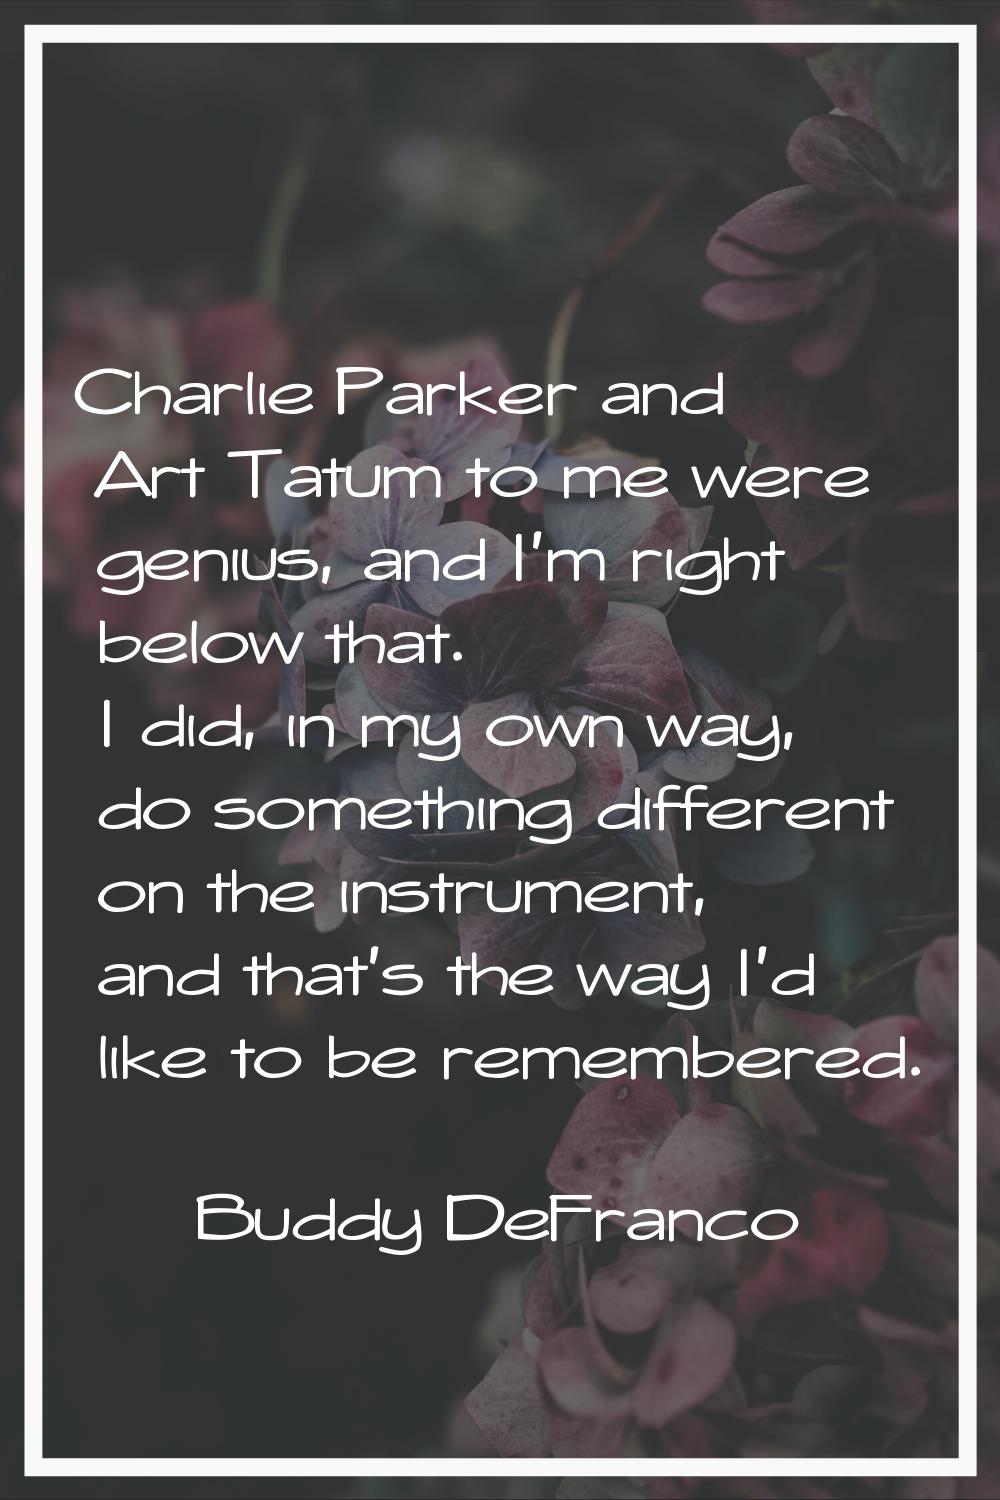 Charlie Parker and Art Tatum to me were genius, and I'm right below that. I did, in my own way, do 